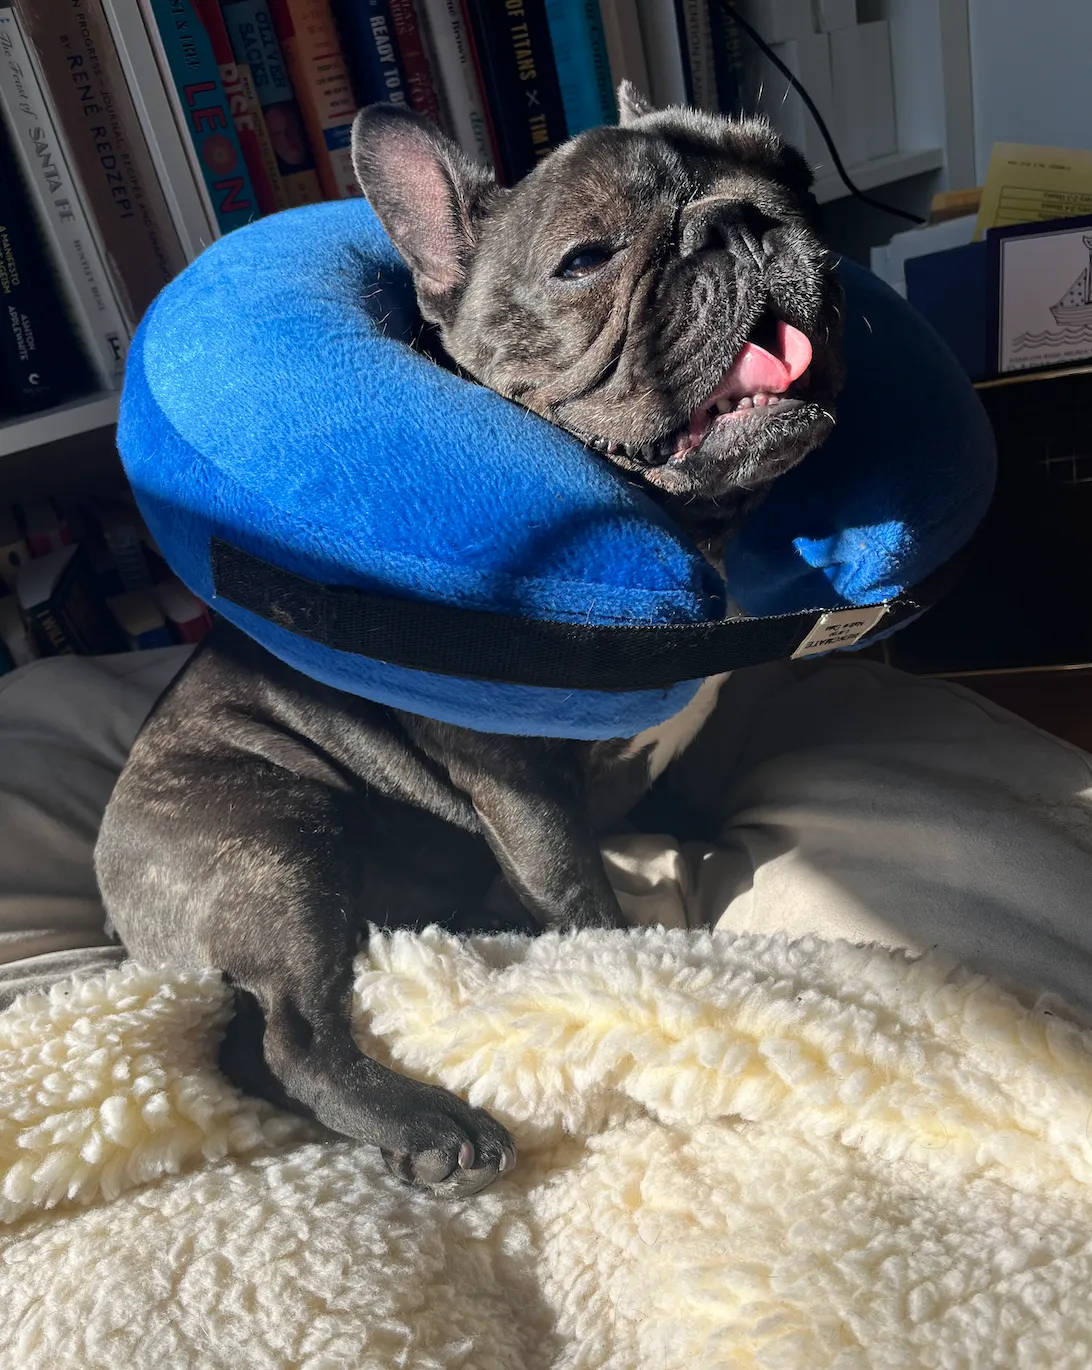 A brindle french bulldog with a pink tongue wearing a blue blow up cone that looks like a travel pillow